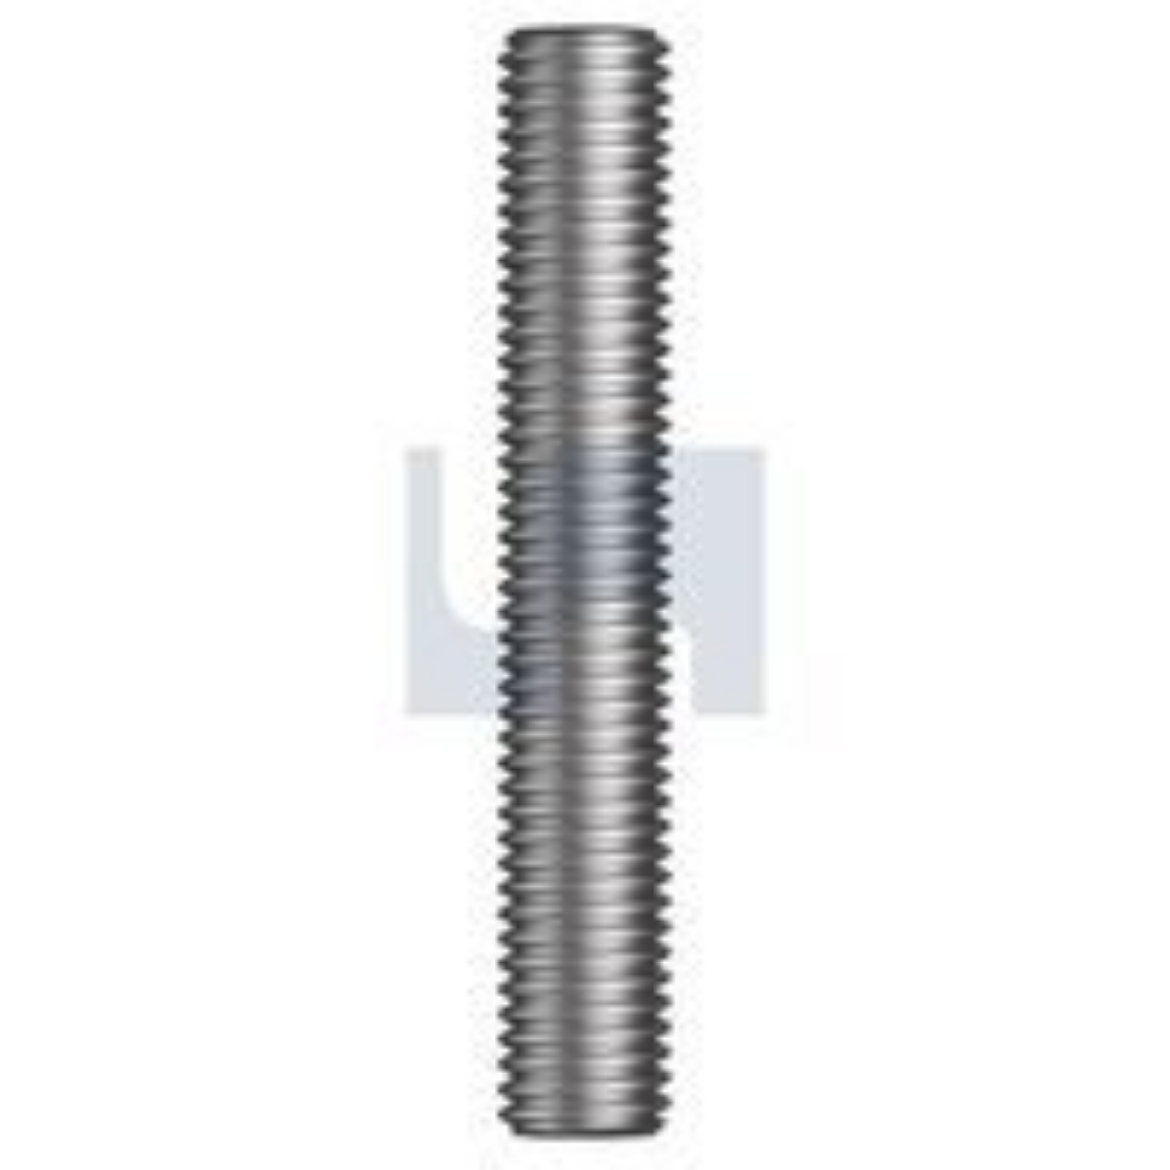 Picture of M12 x 1M THREADED ROD A4-70 DIN975 - STAINLESS STEEL